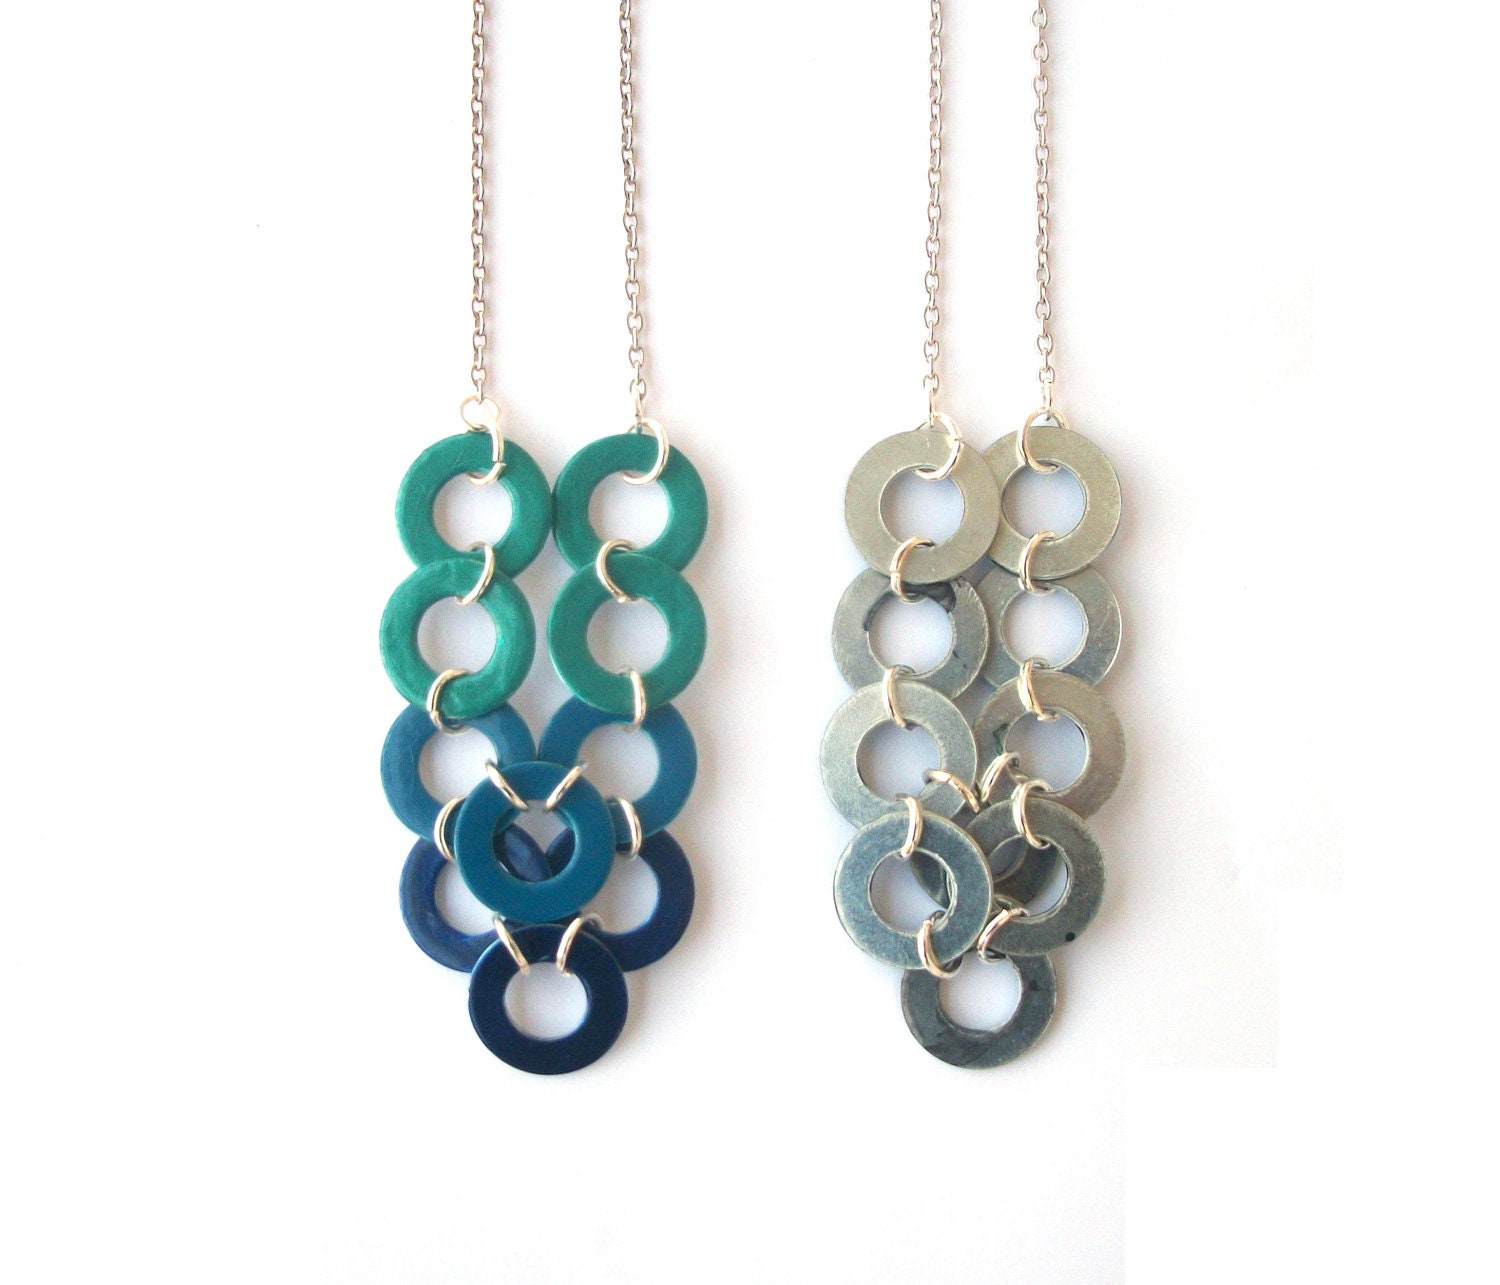 Ombre Geometric Necklace - Hand Painted Blue to Teal Washer Industrial Fashion Necklace - AmplifiedPeople